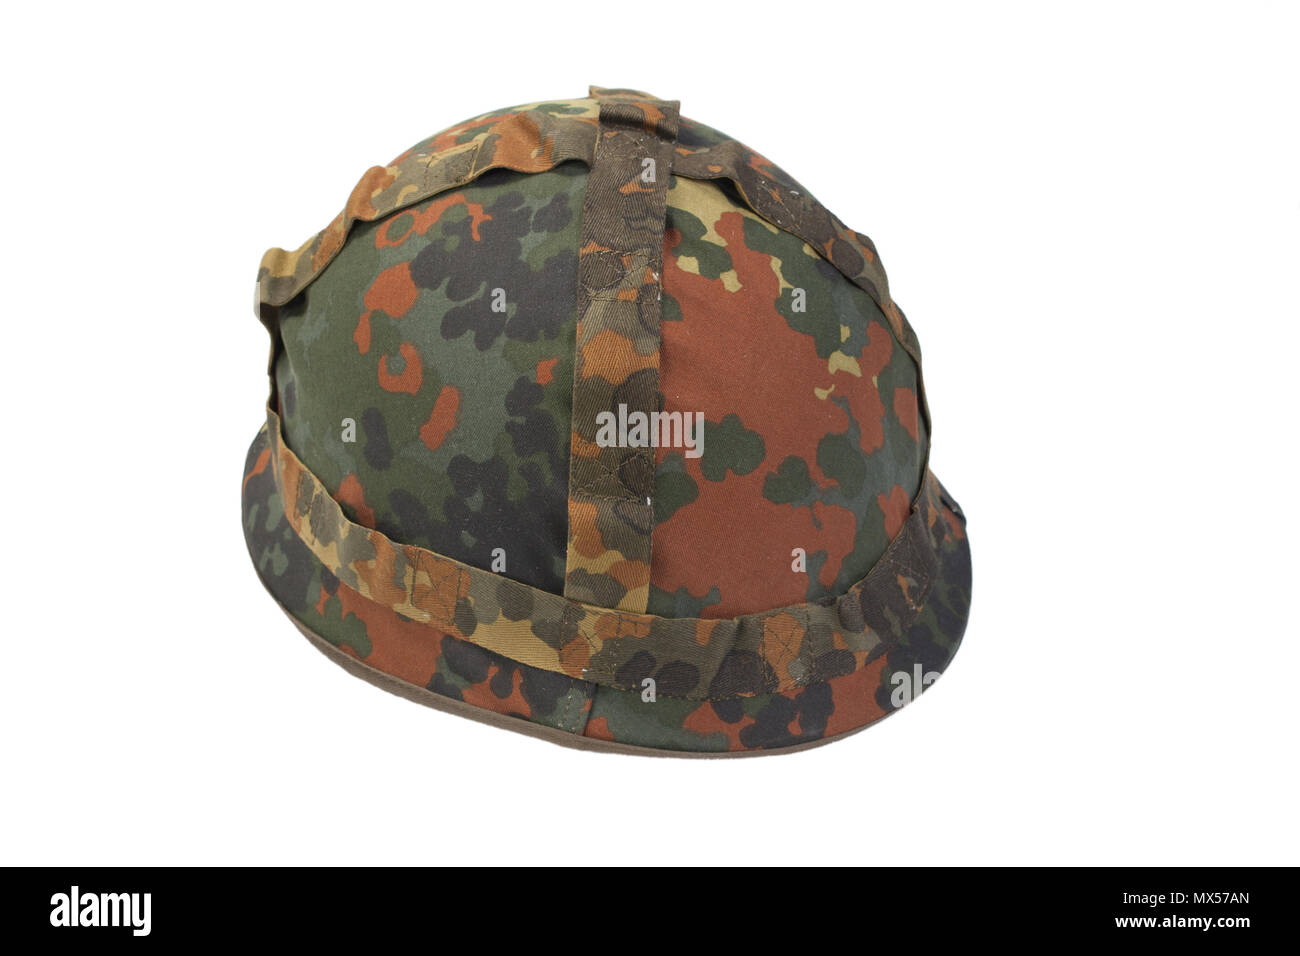 bundeswehr helmet with camouflage cover isolated on white background Stock Photo